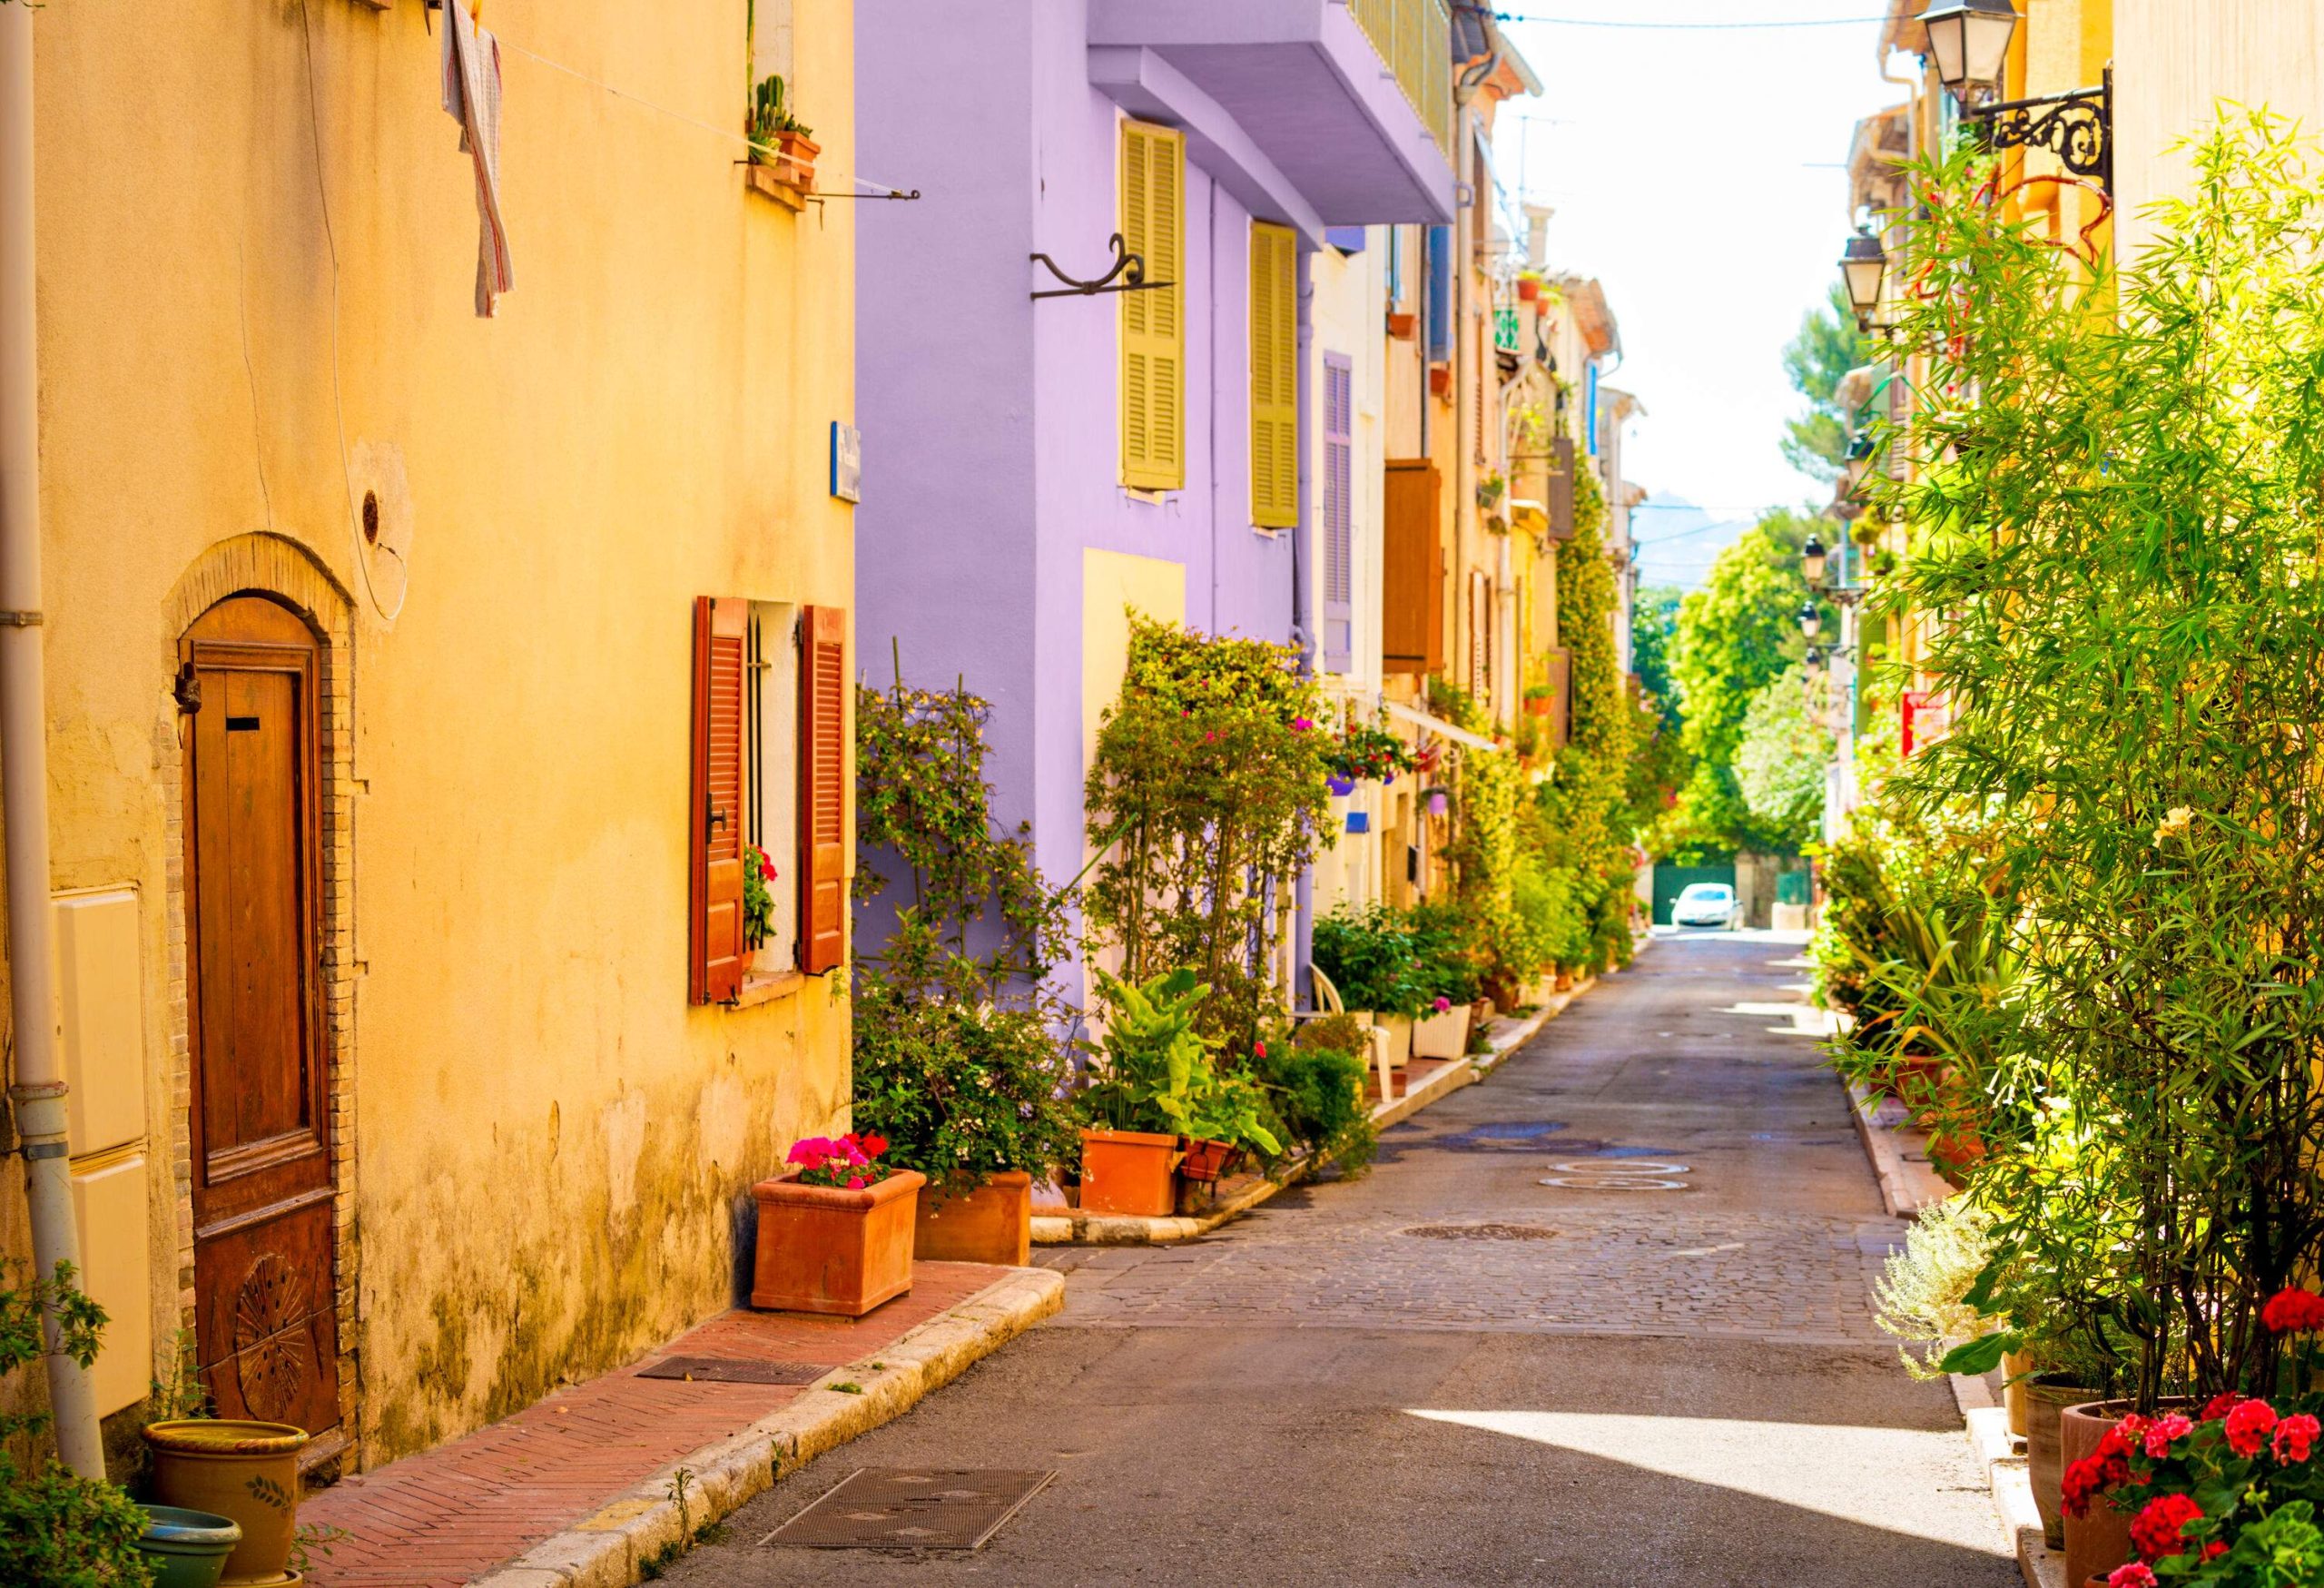 A narrow lane lined by potted plants and a series of brightly painted homes.